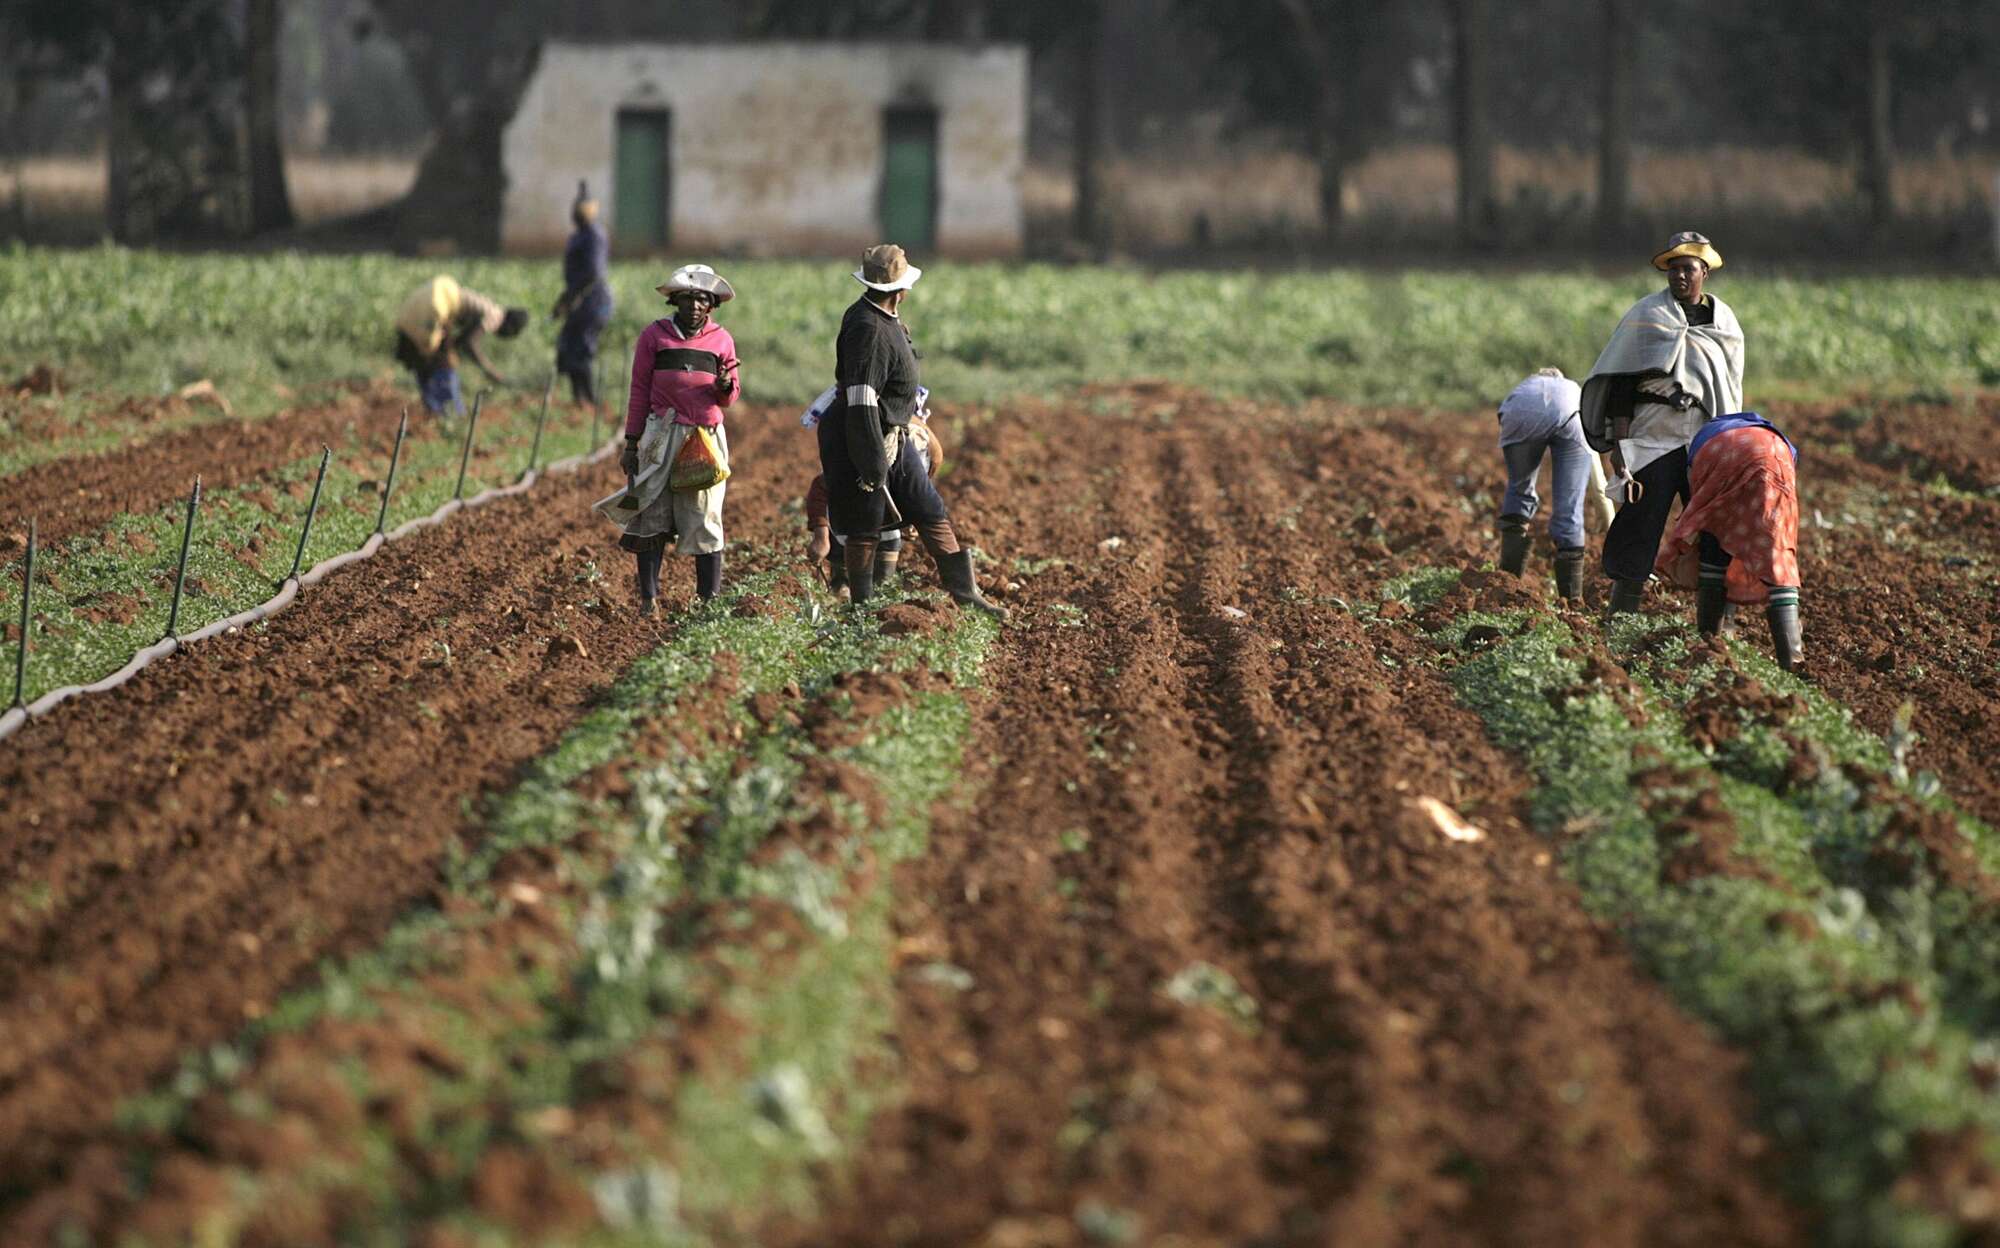 Getting agriculture policies right is key to feeding Africa